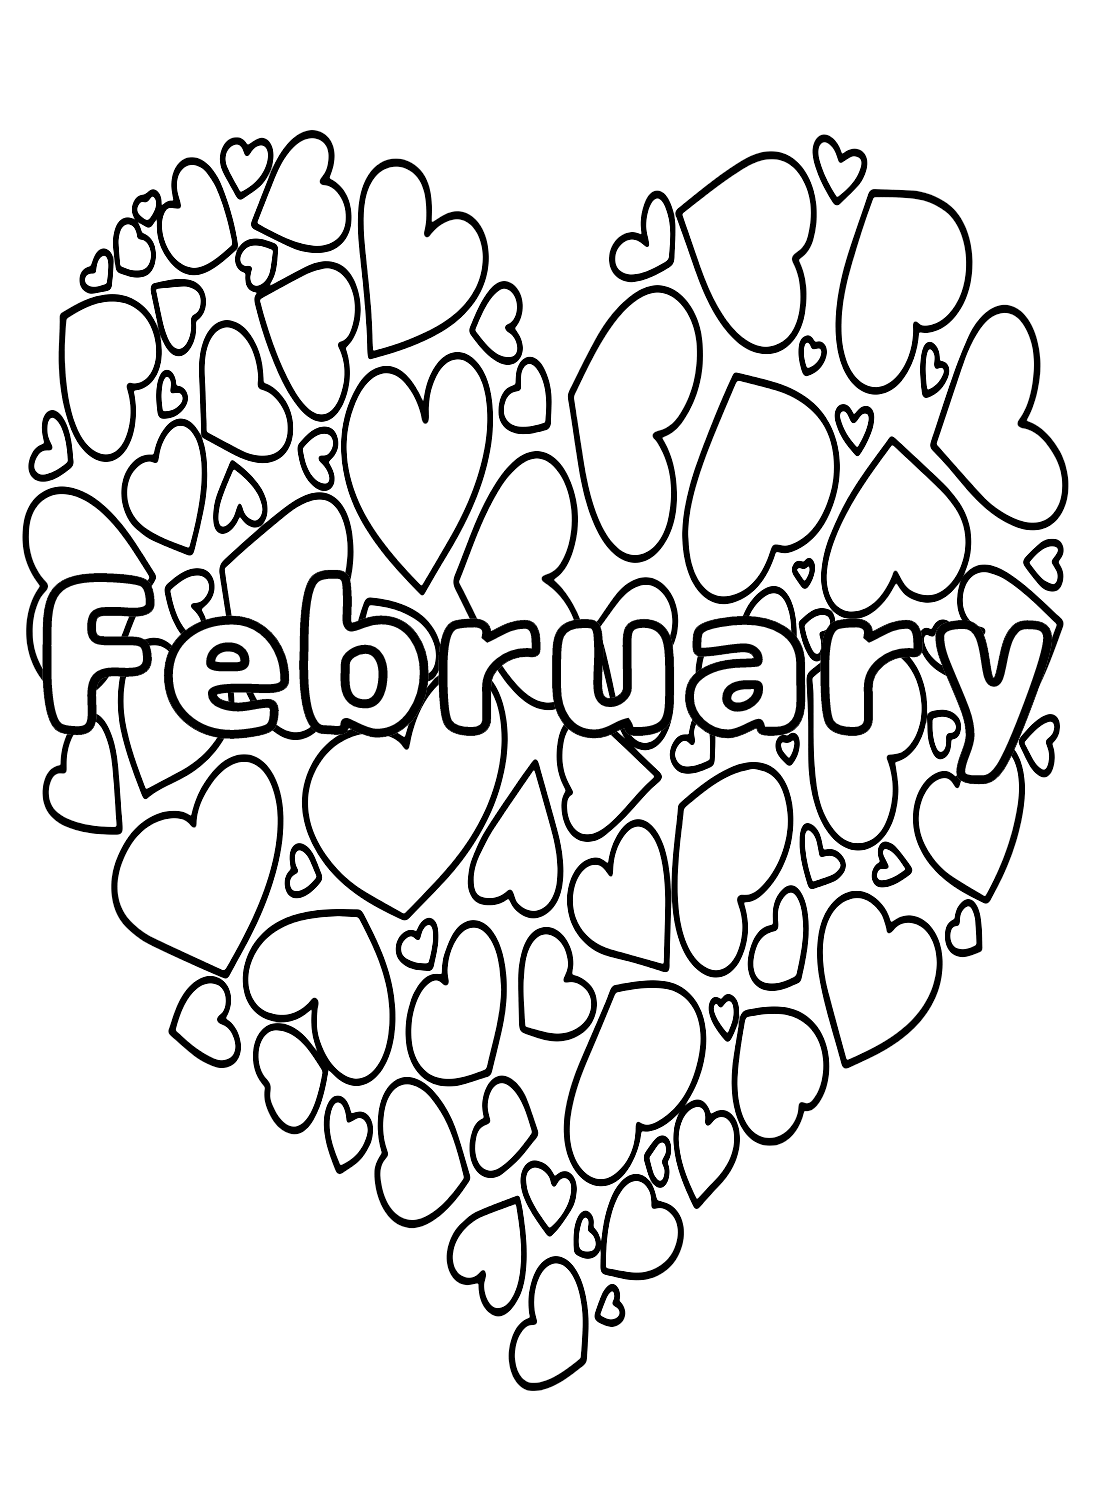 February with Hearts Coloring Pages